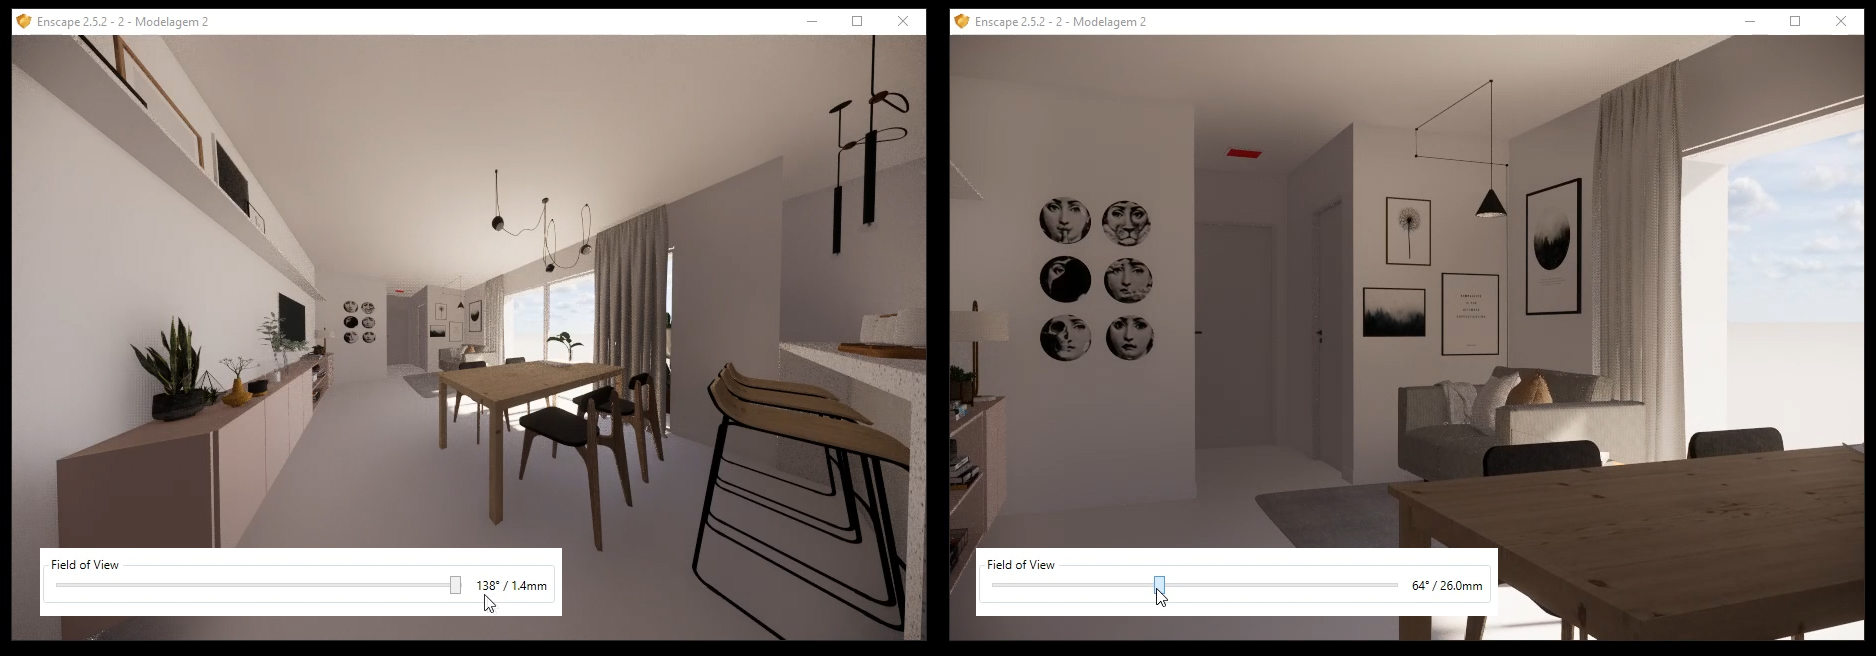 Misconfiguration of the field of view can distort your final rendering.